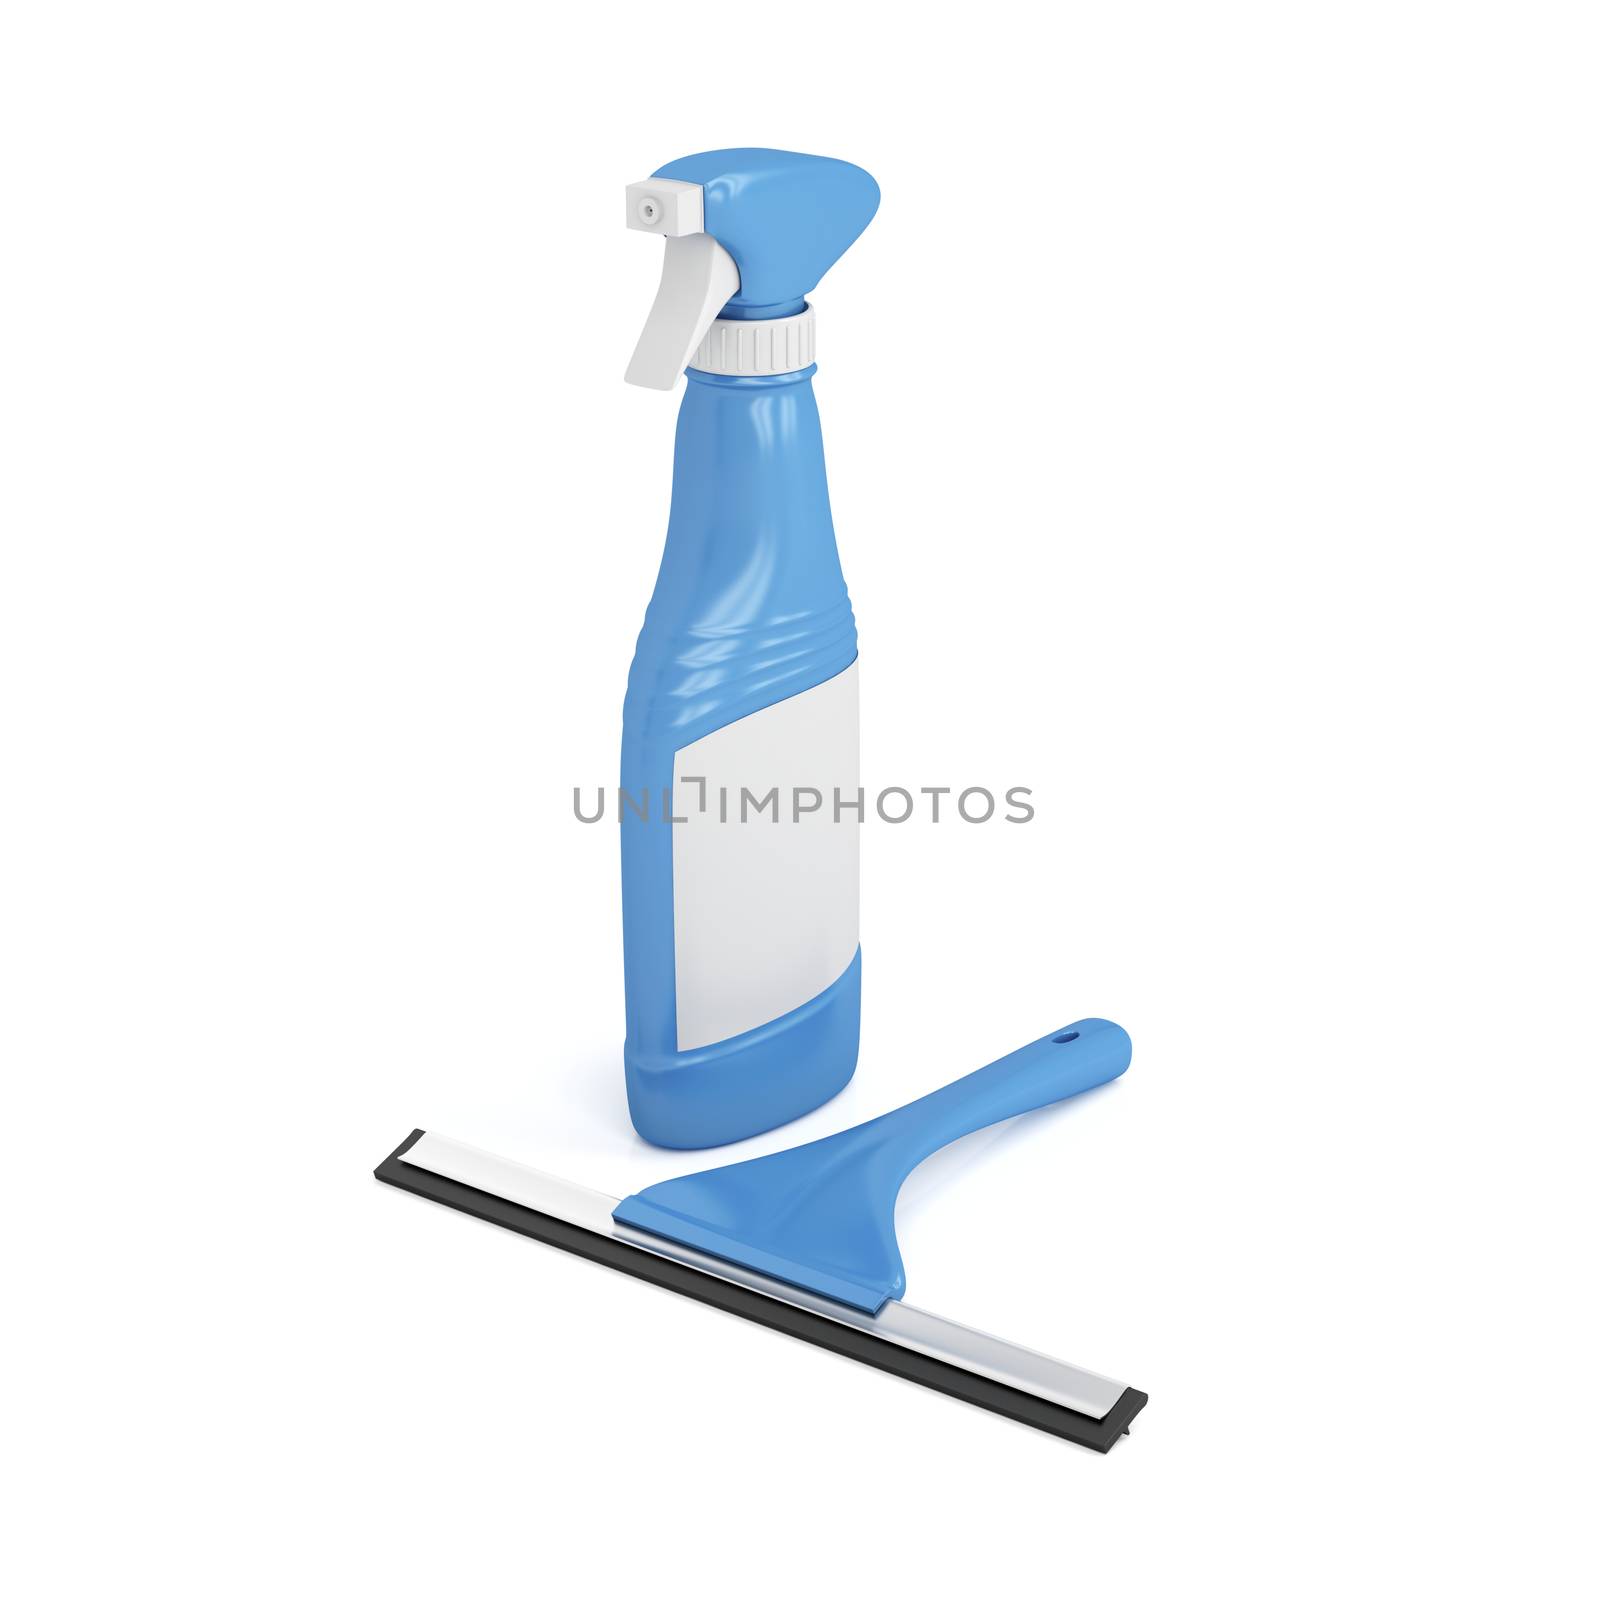 Squeegee and window cleaner spray bottle on white background